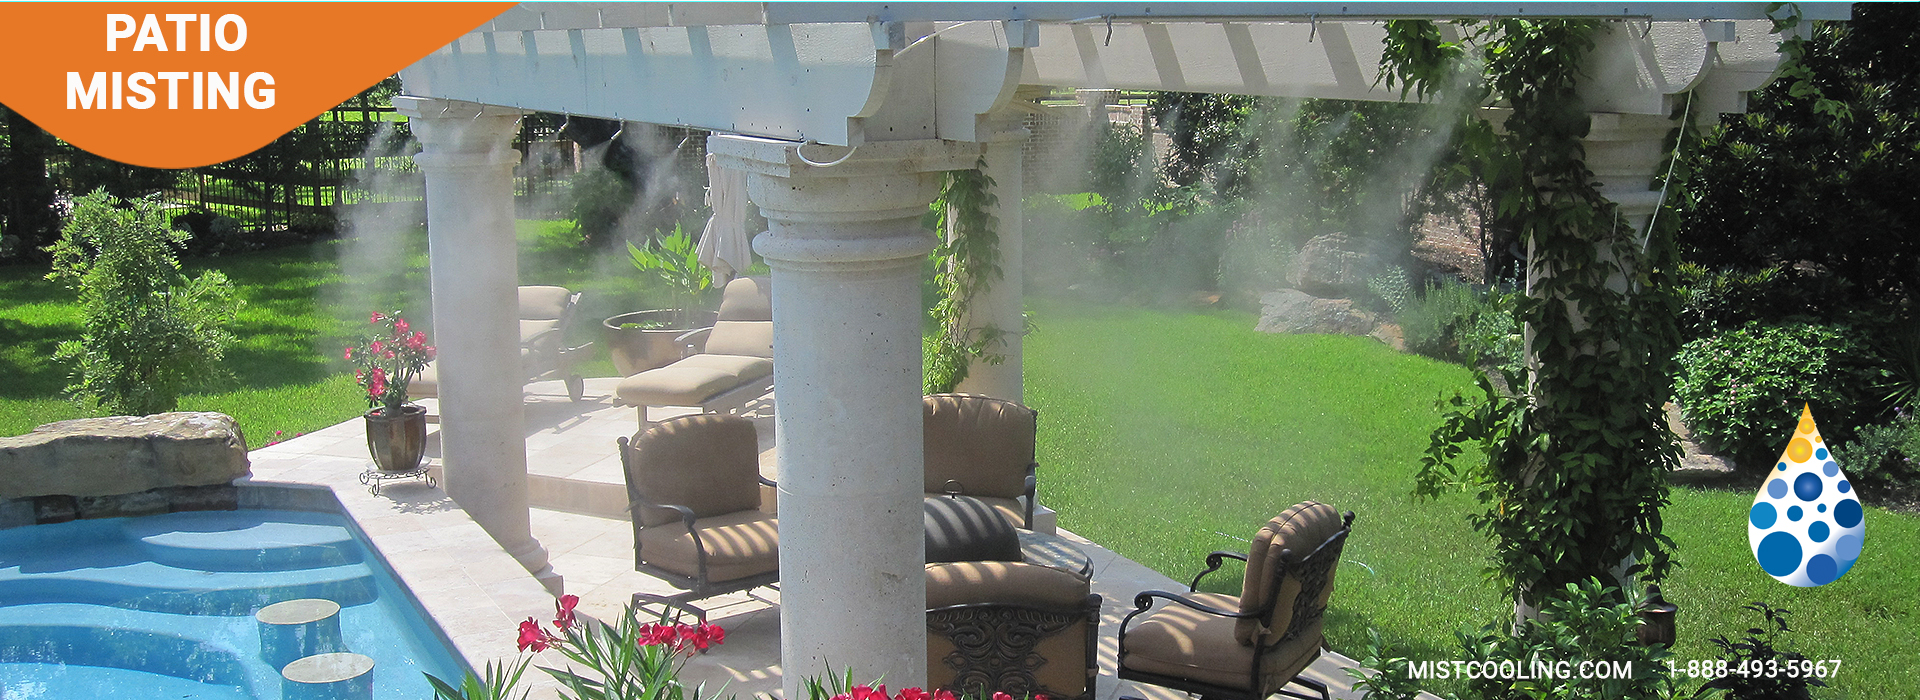 Low Pressure Misting Systems